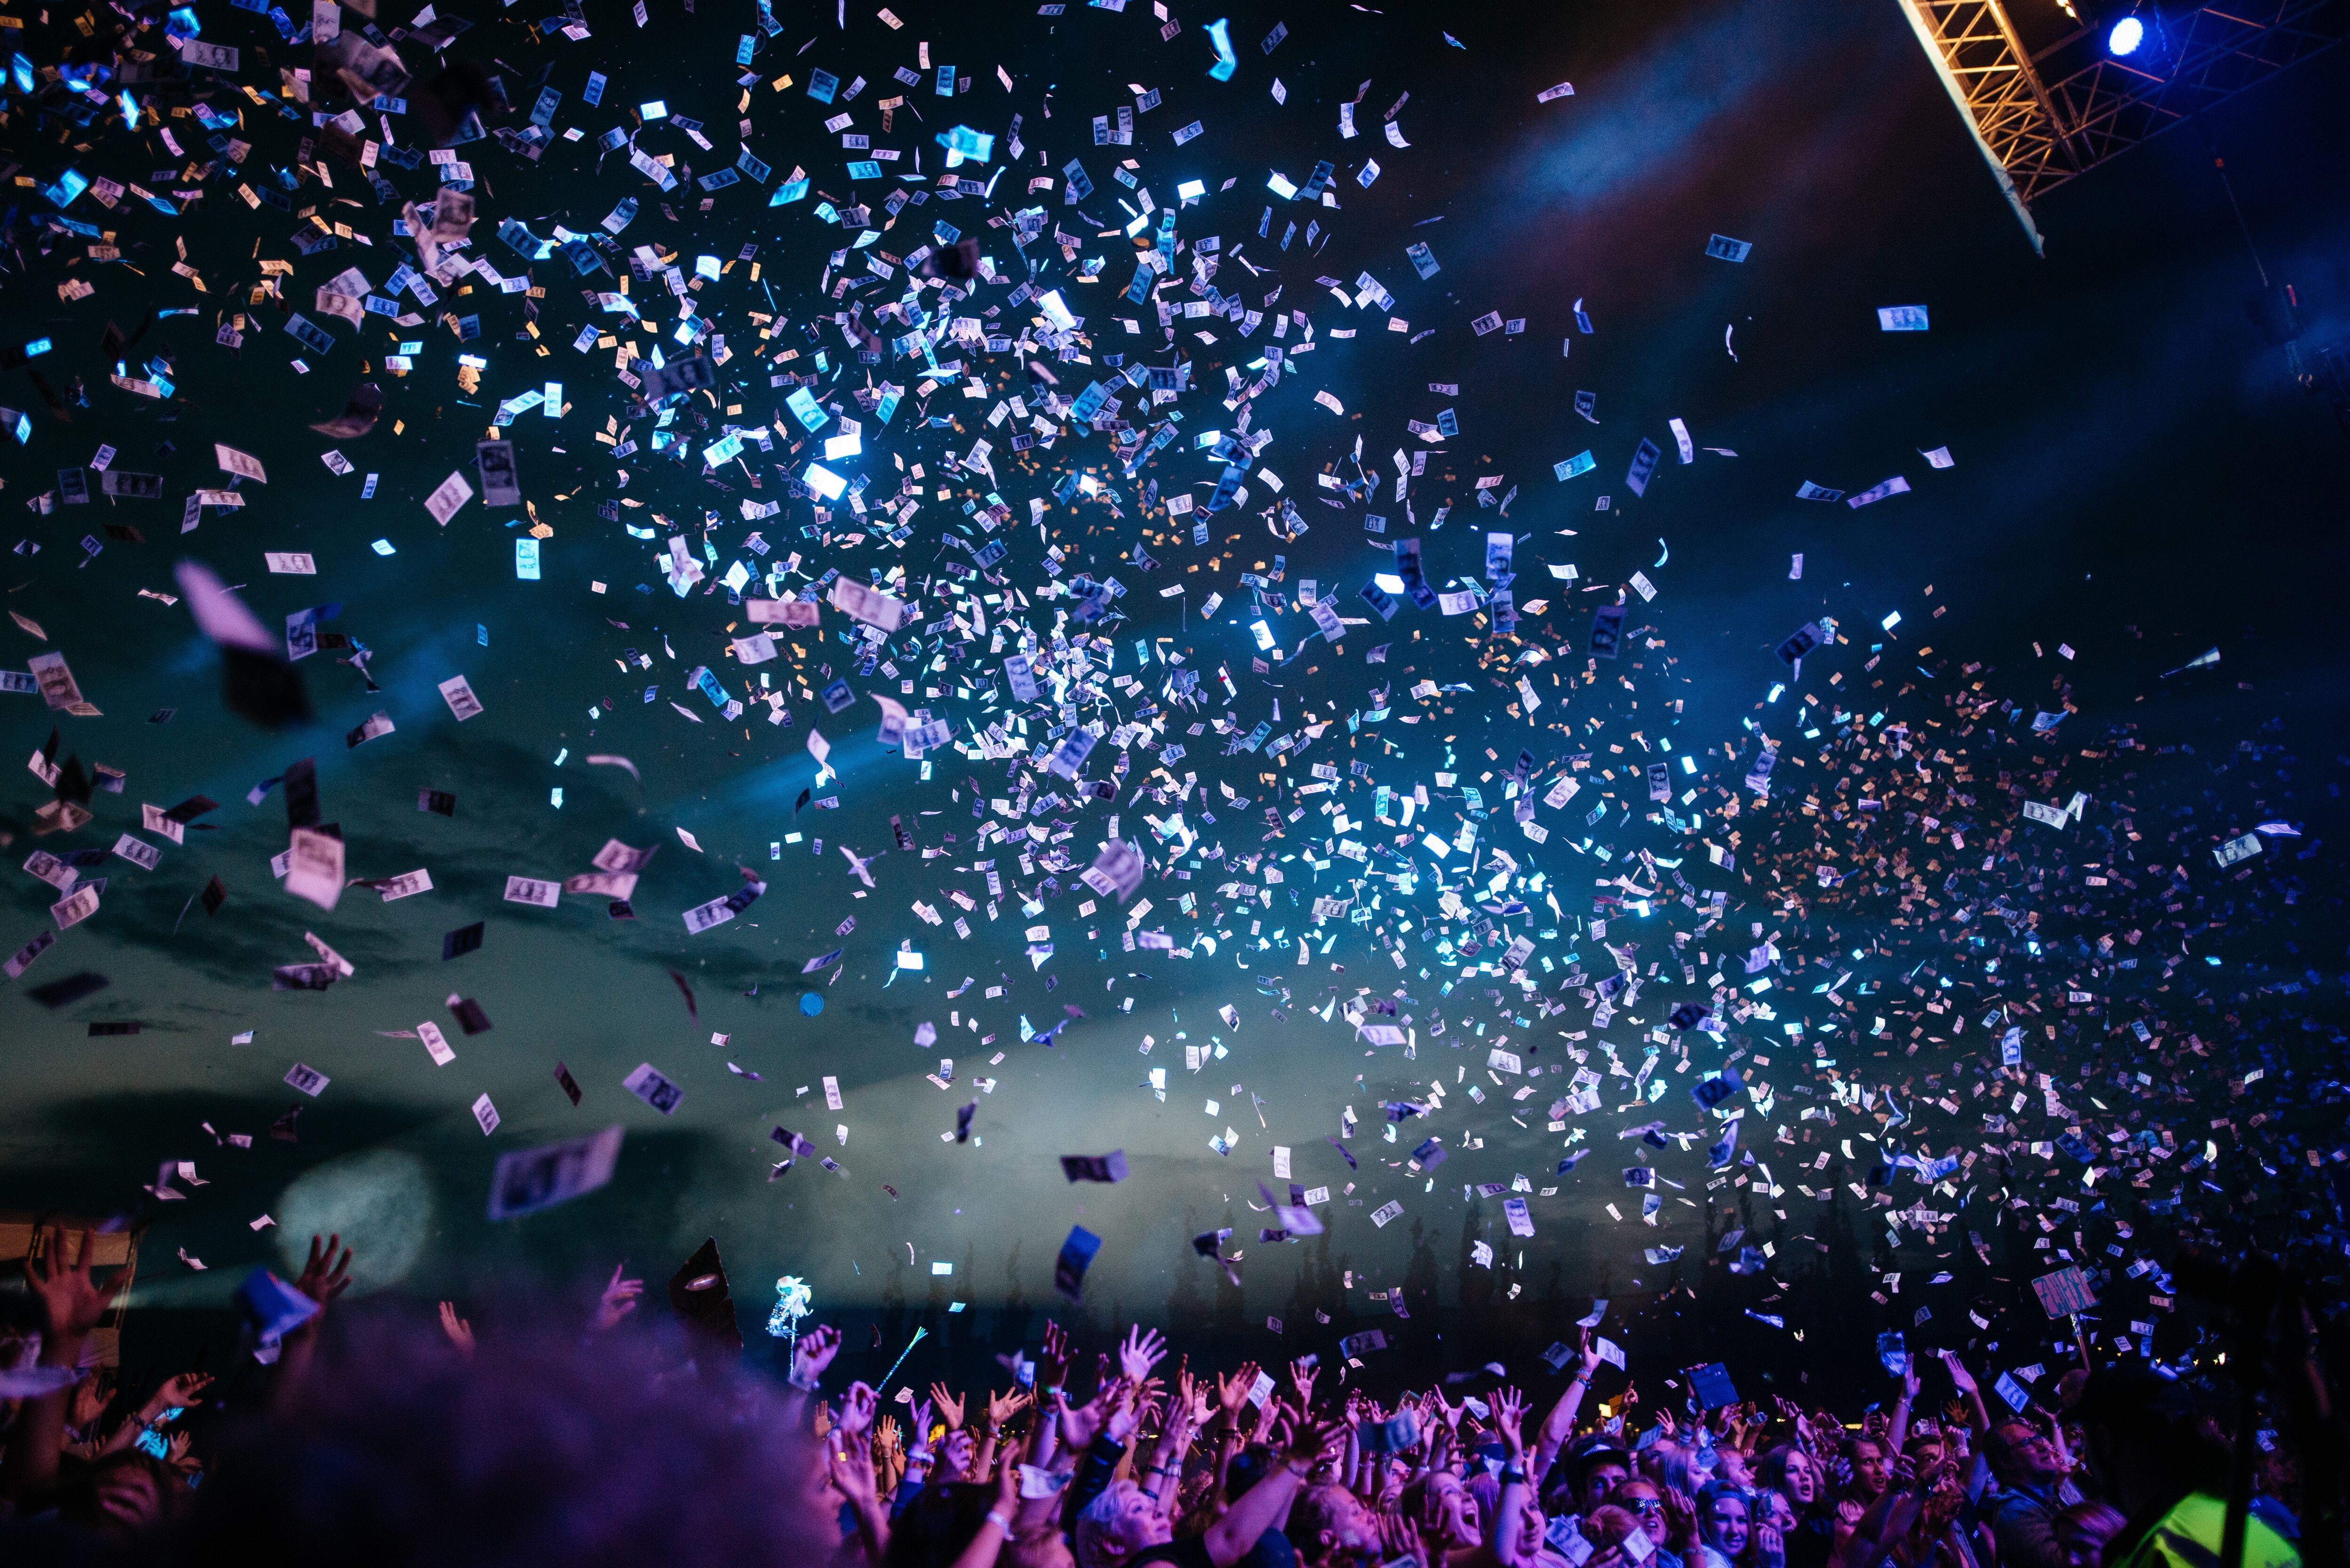 Live performance with confetti